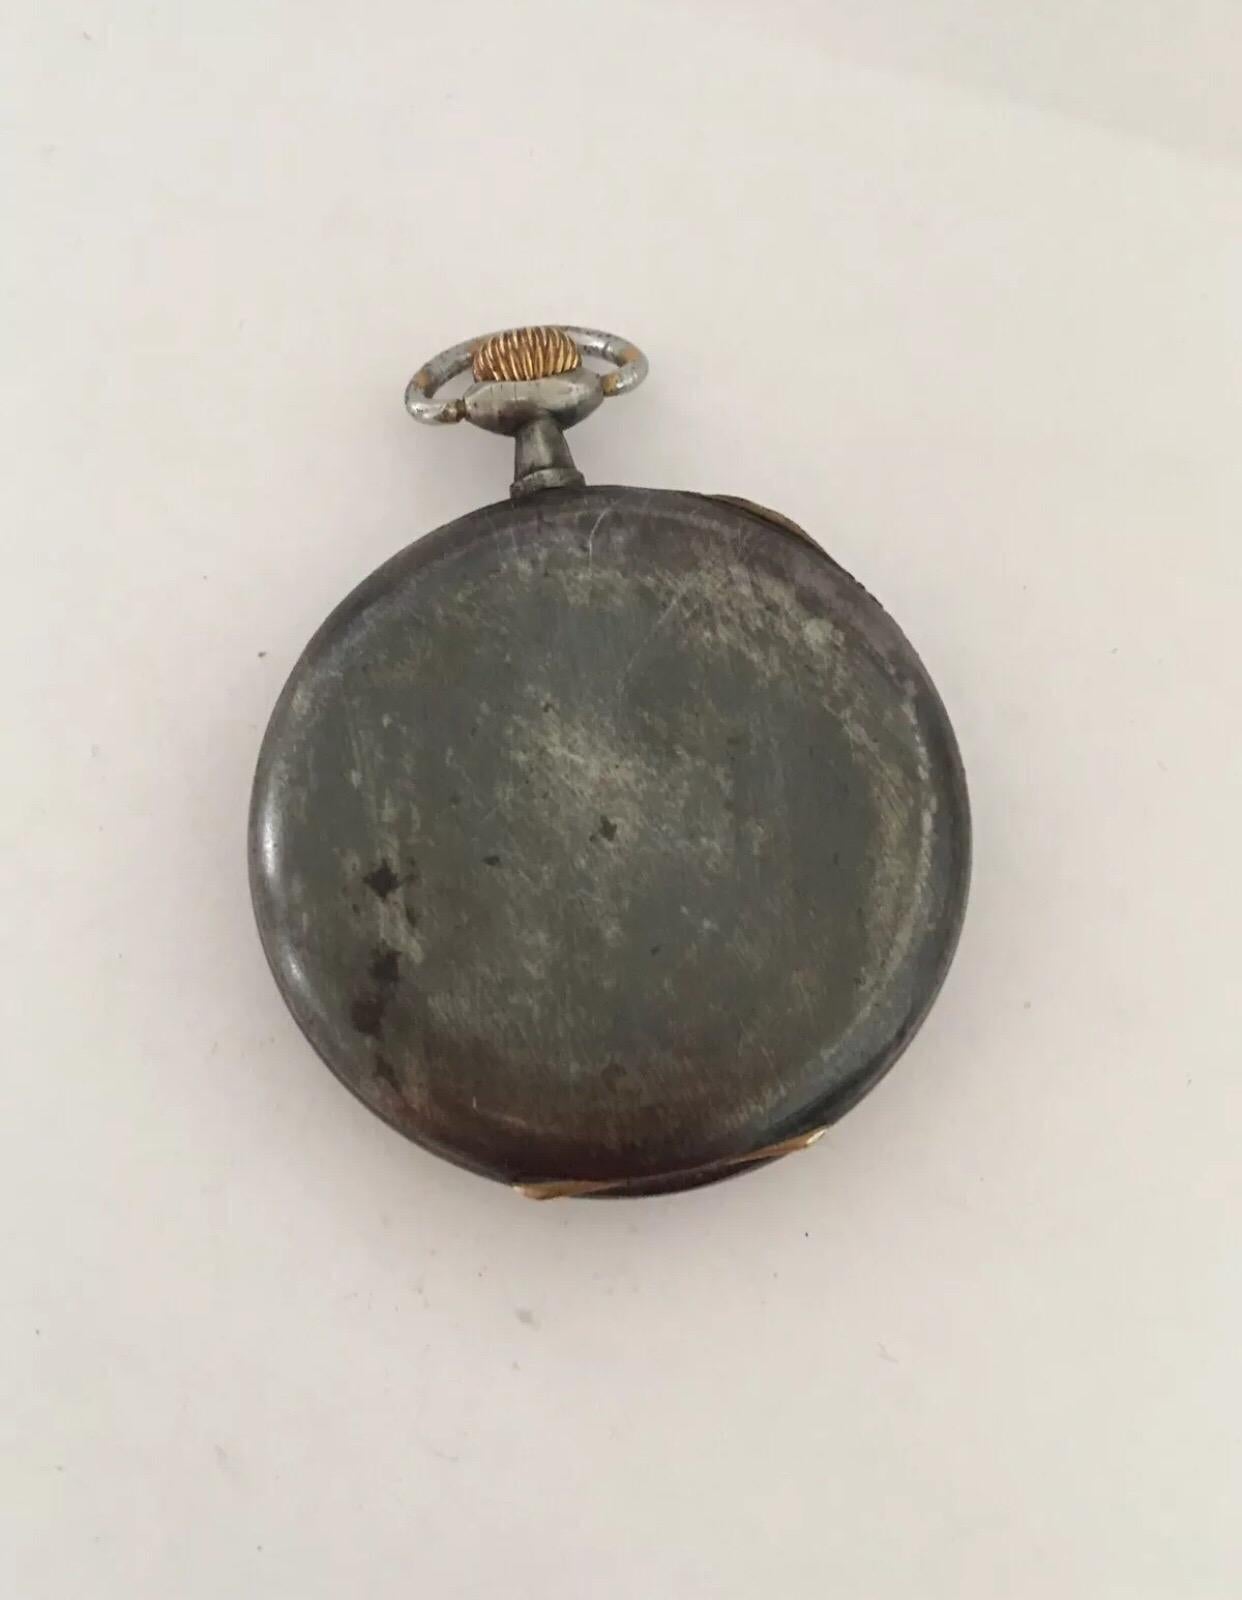 Antique Gunmetal Pocket Watch Working.


This beautiful 50mm diameter keyless stem winding mechanical gunmetal pocket watch is in good working condition and it is running well. Visible signs of ageing and wear with tiny and light surface marks on